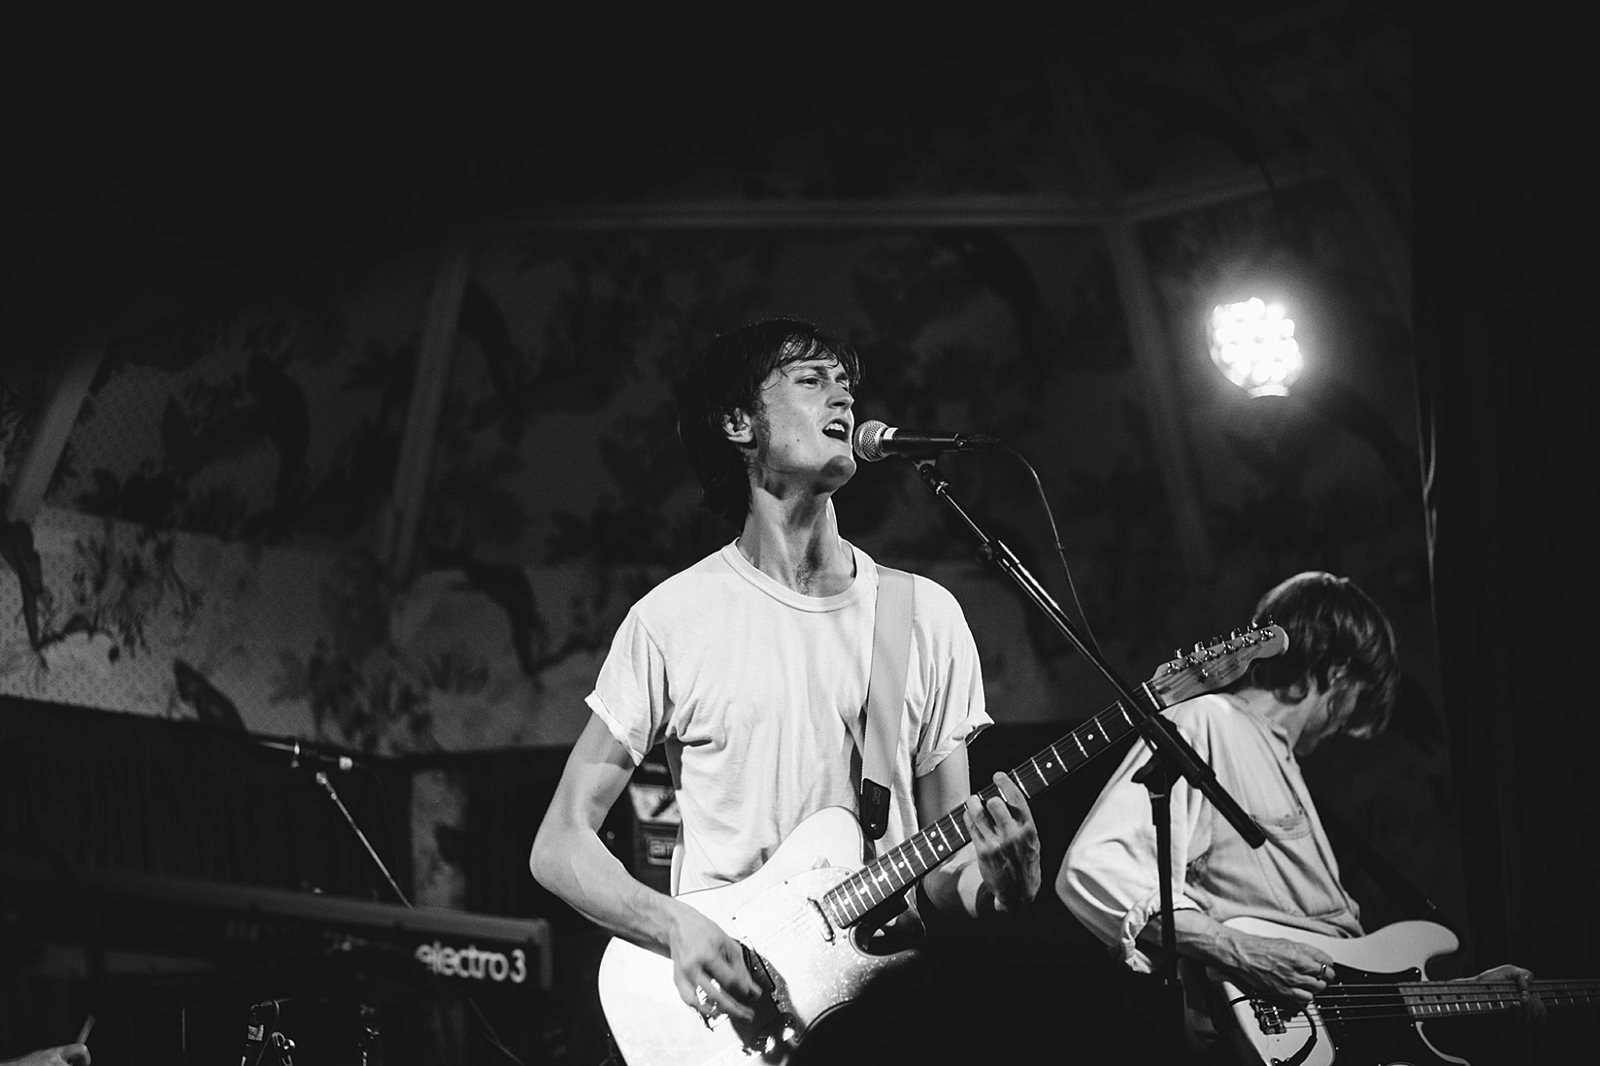 Ought, Deaf Institute, Manchester